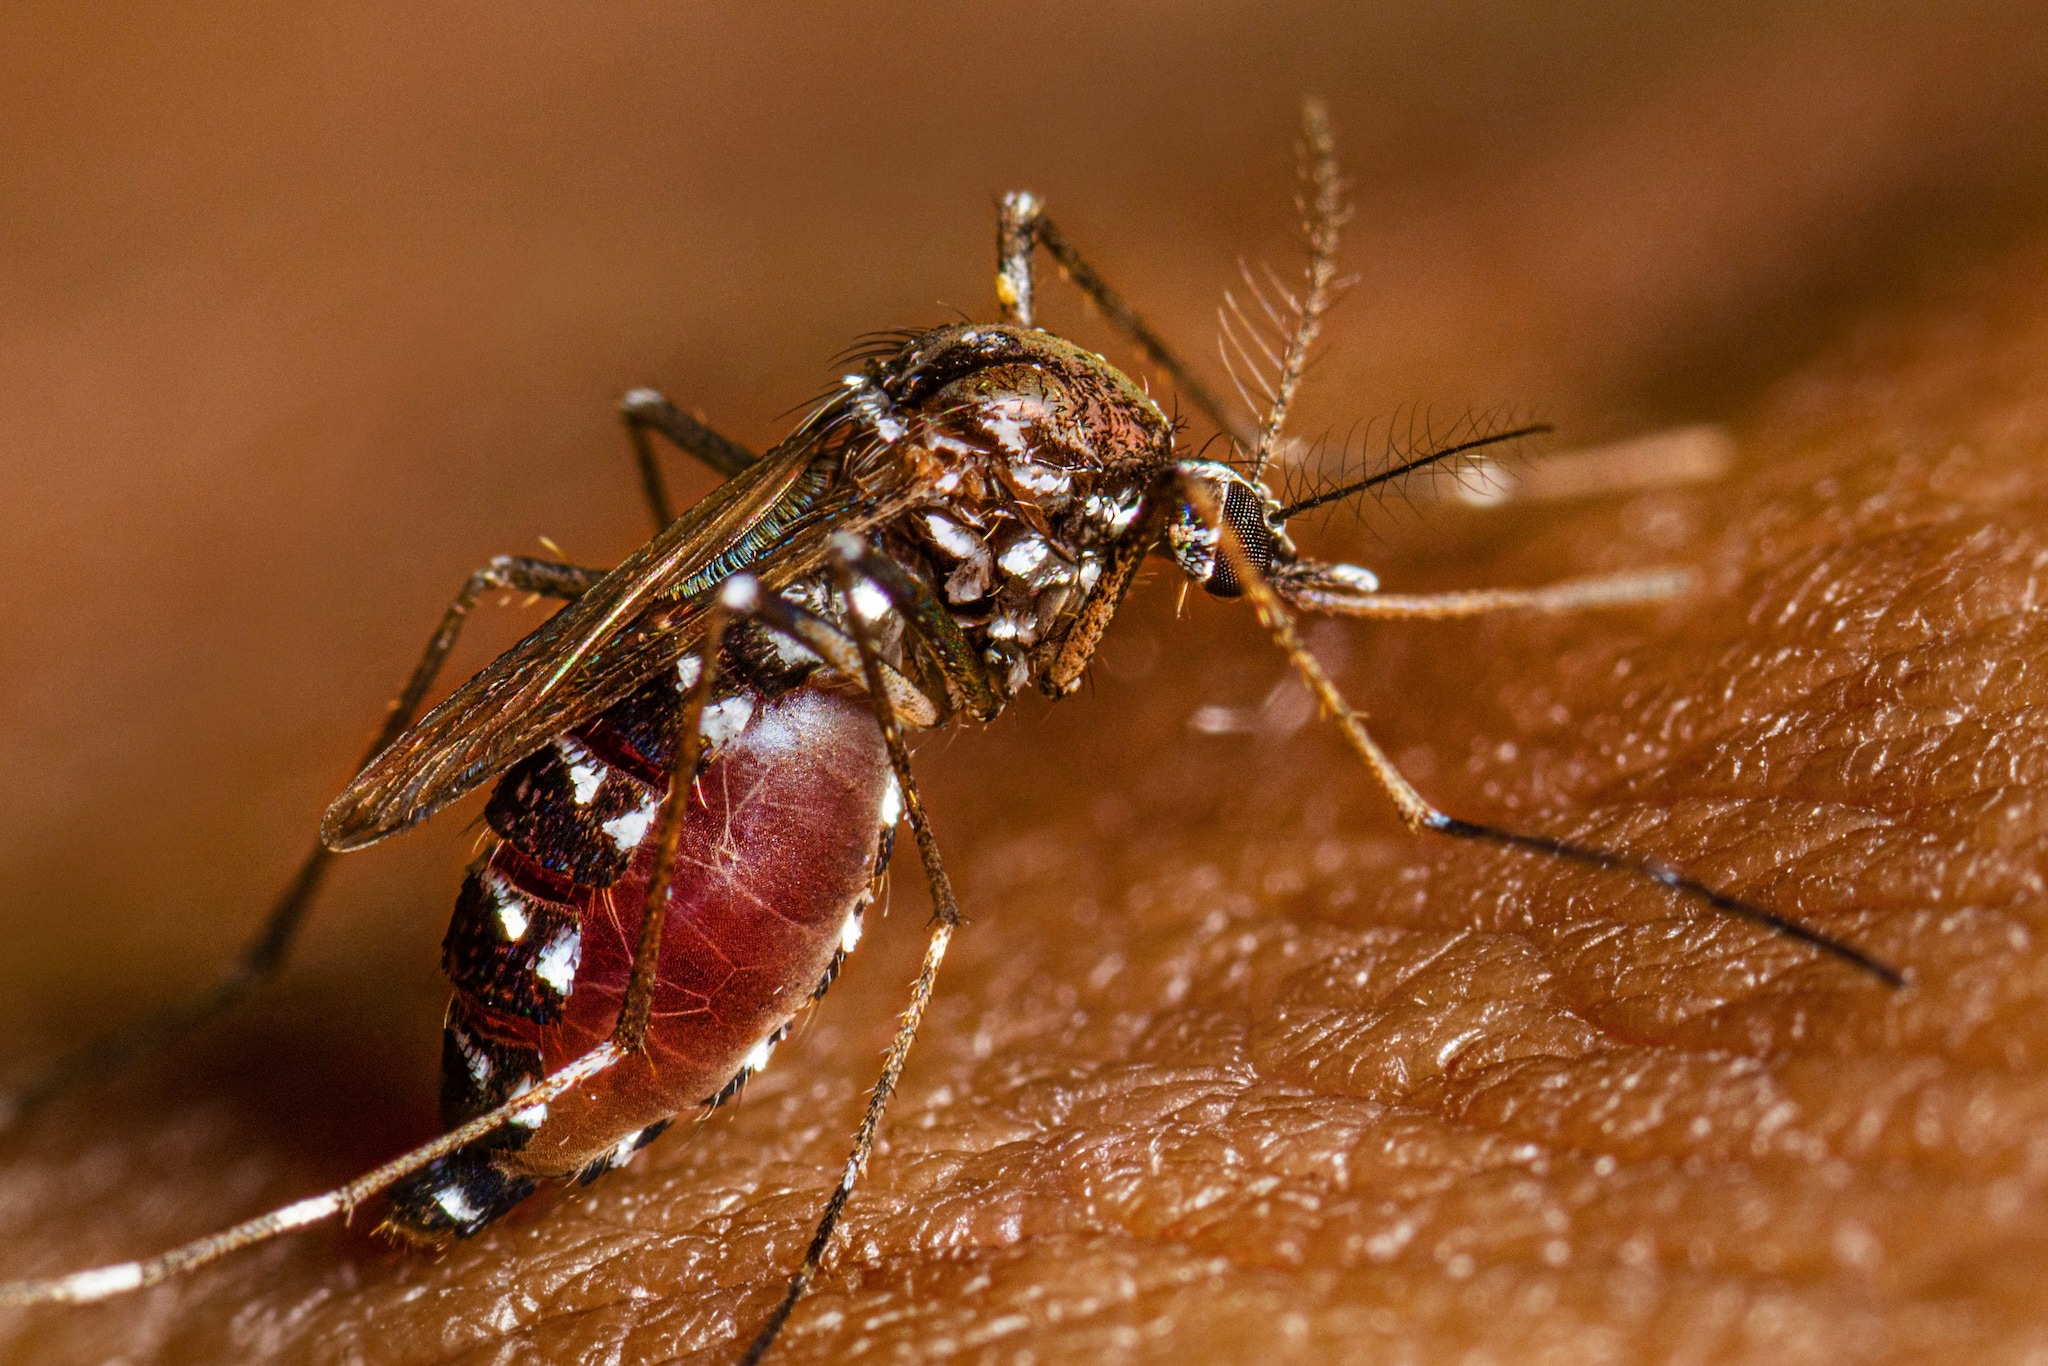 Adult female Aedes albopictus after a blood meal